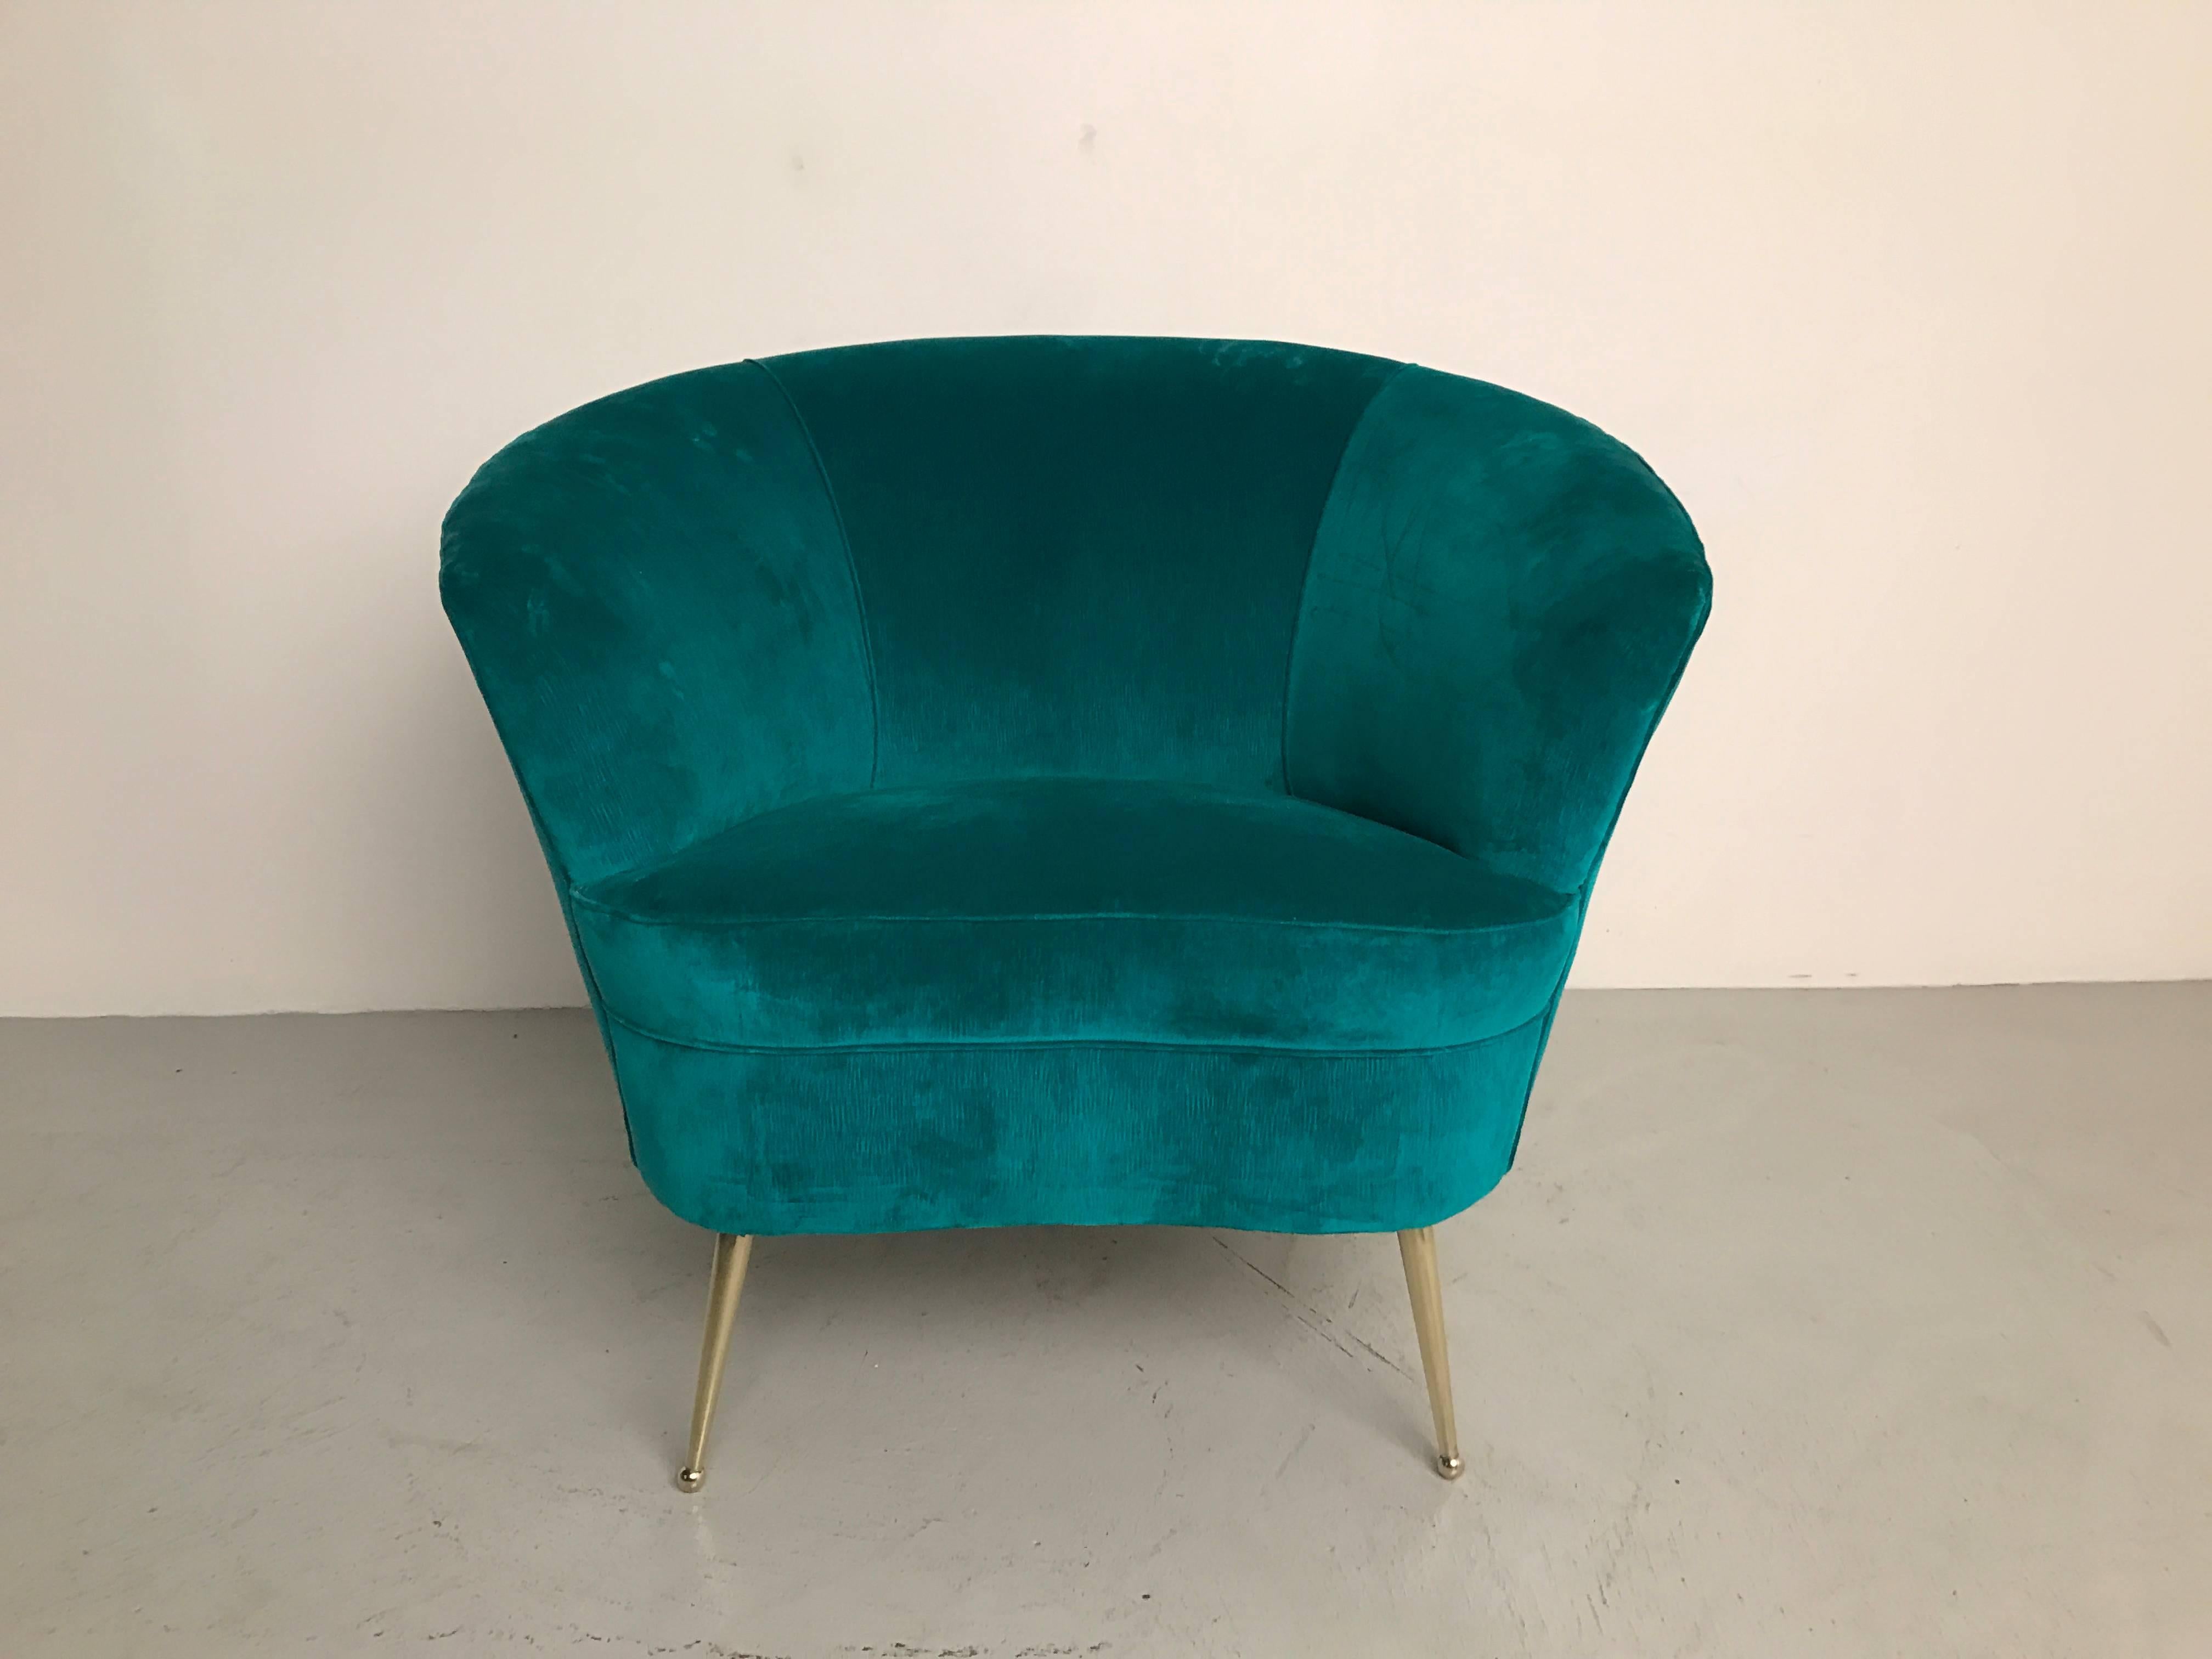 Gorgeous pair of sculptural Italian chairs with amazing line. Newly upholstered in teal velvet with brass legs. Great wide shape!